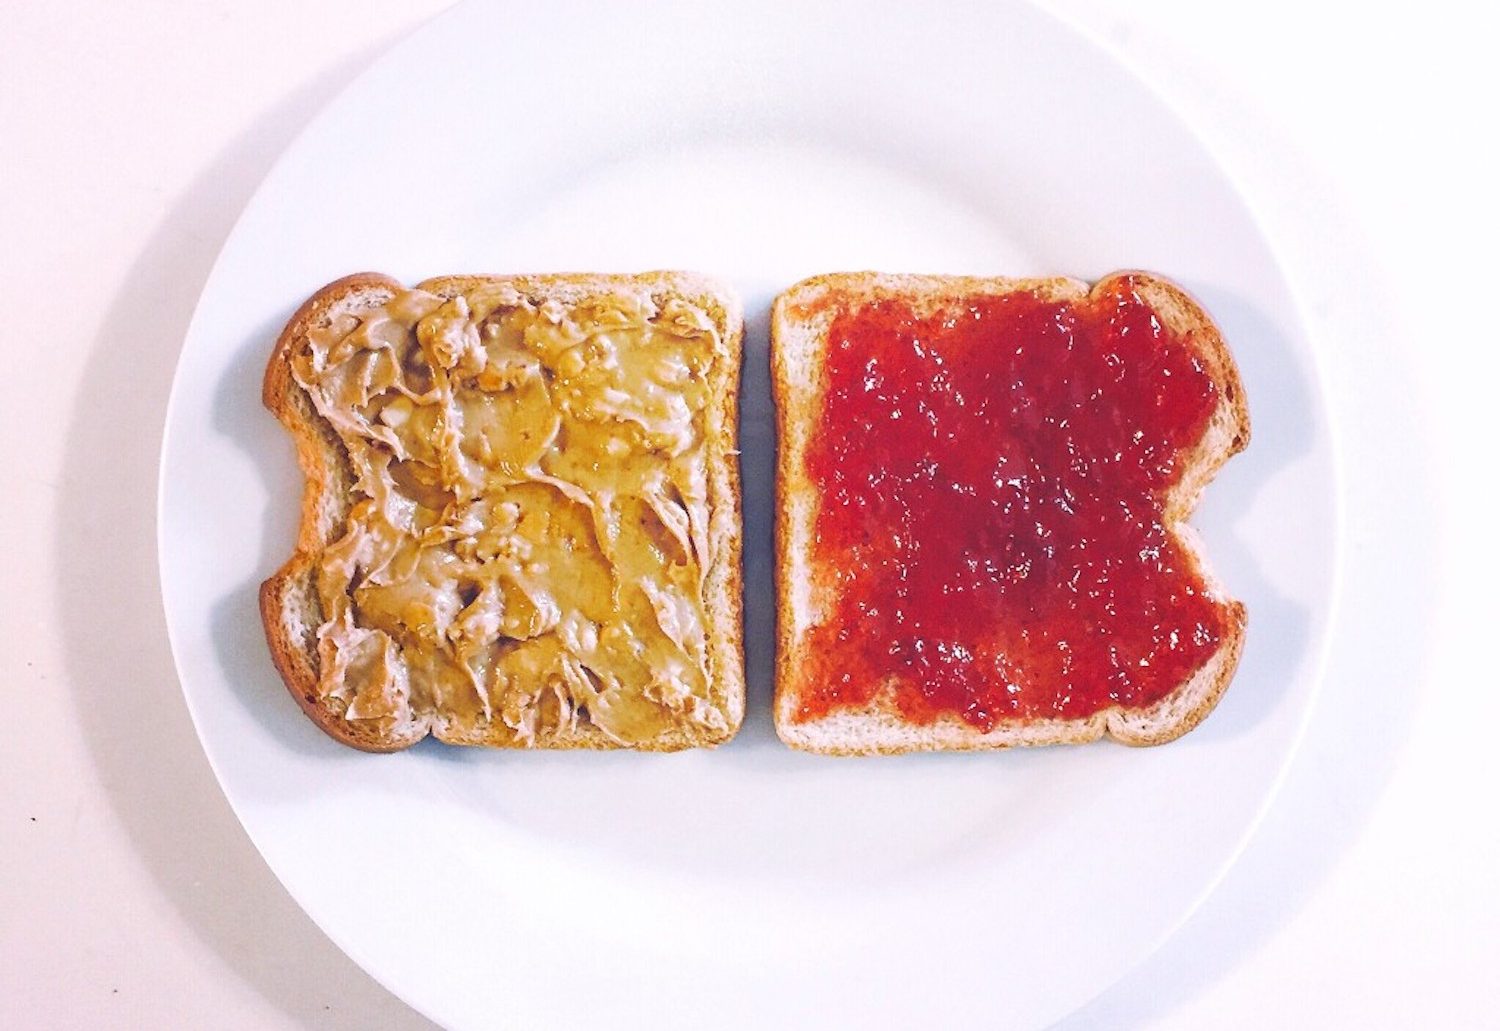 An Image of two bread toasts with different flavours in a plate.